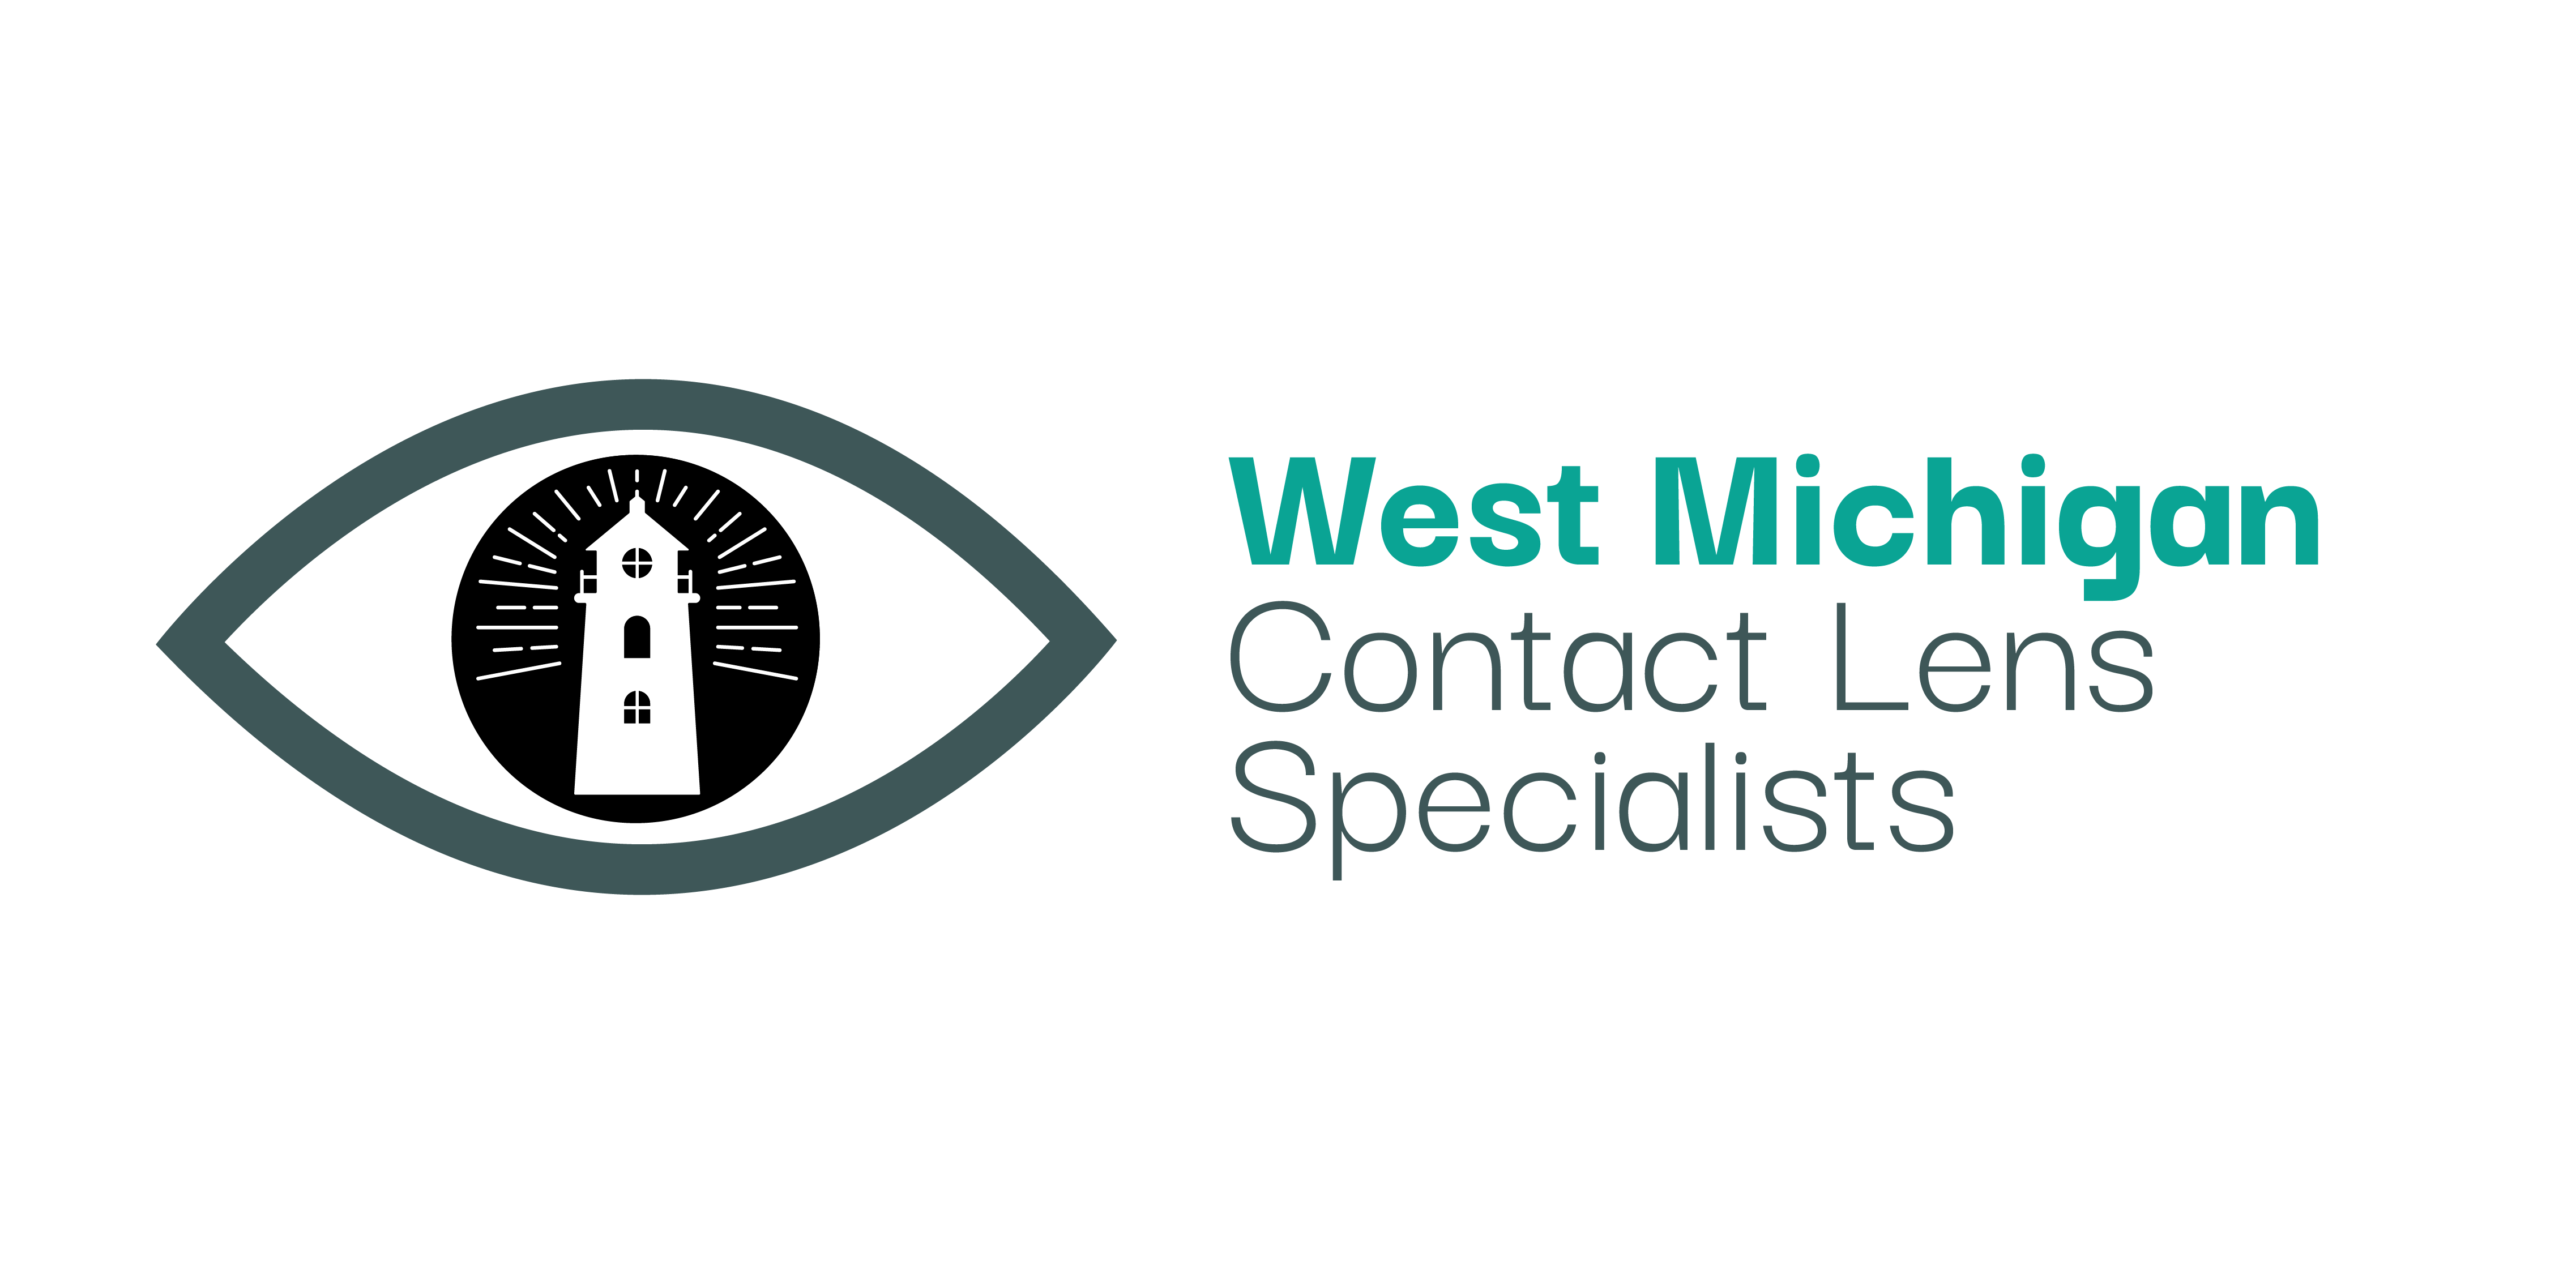 West Michigan Contact Lens Specialists